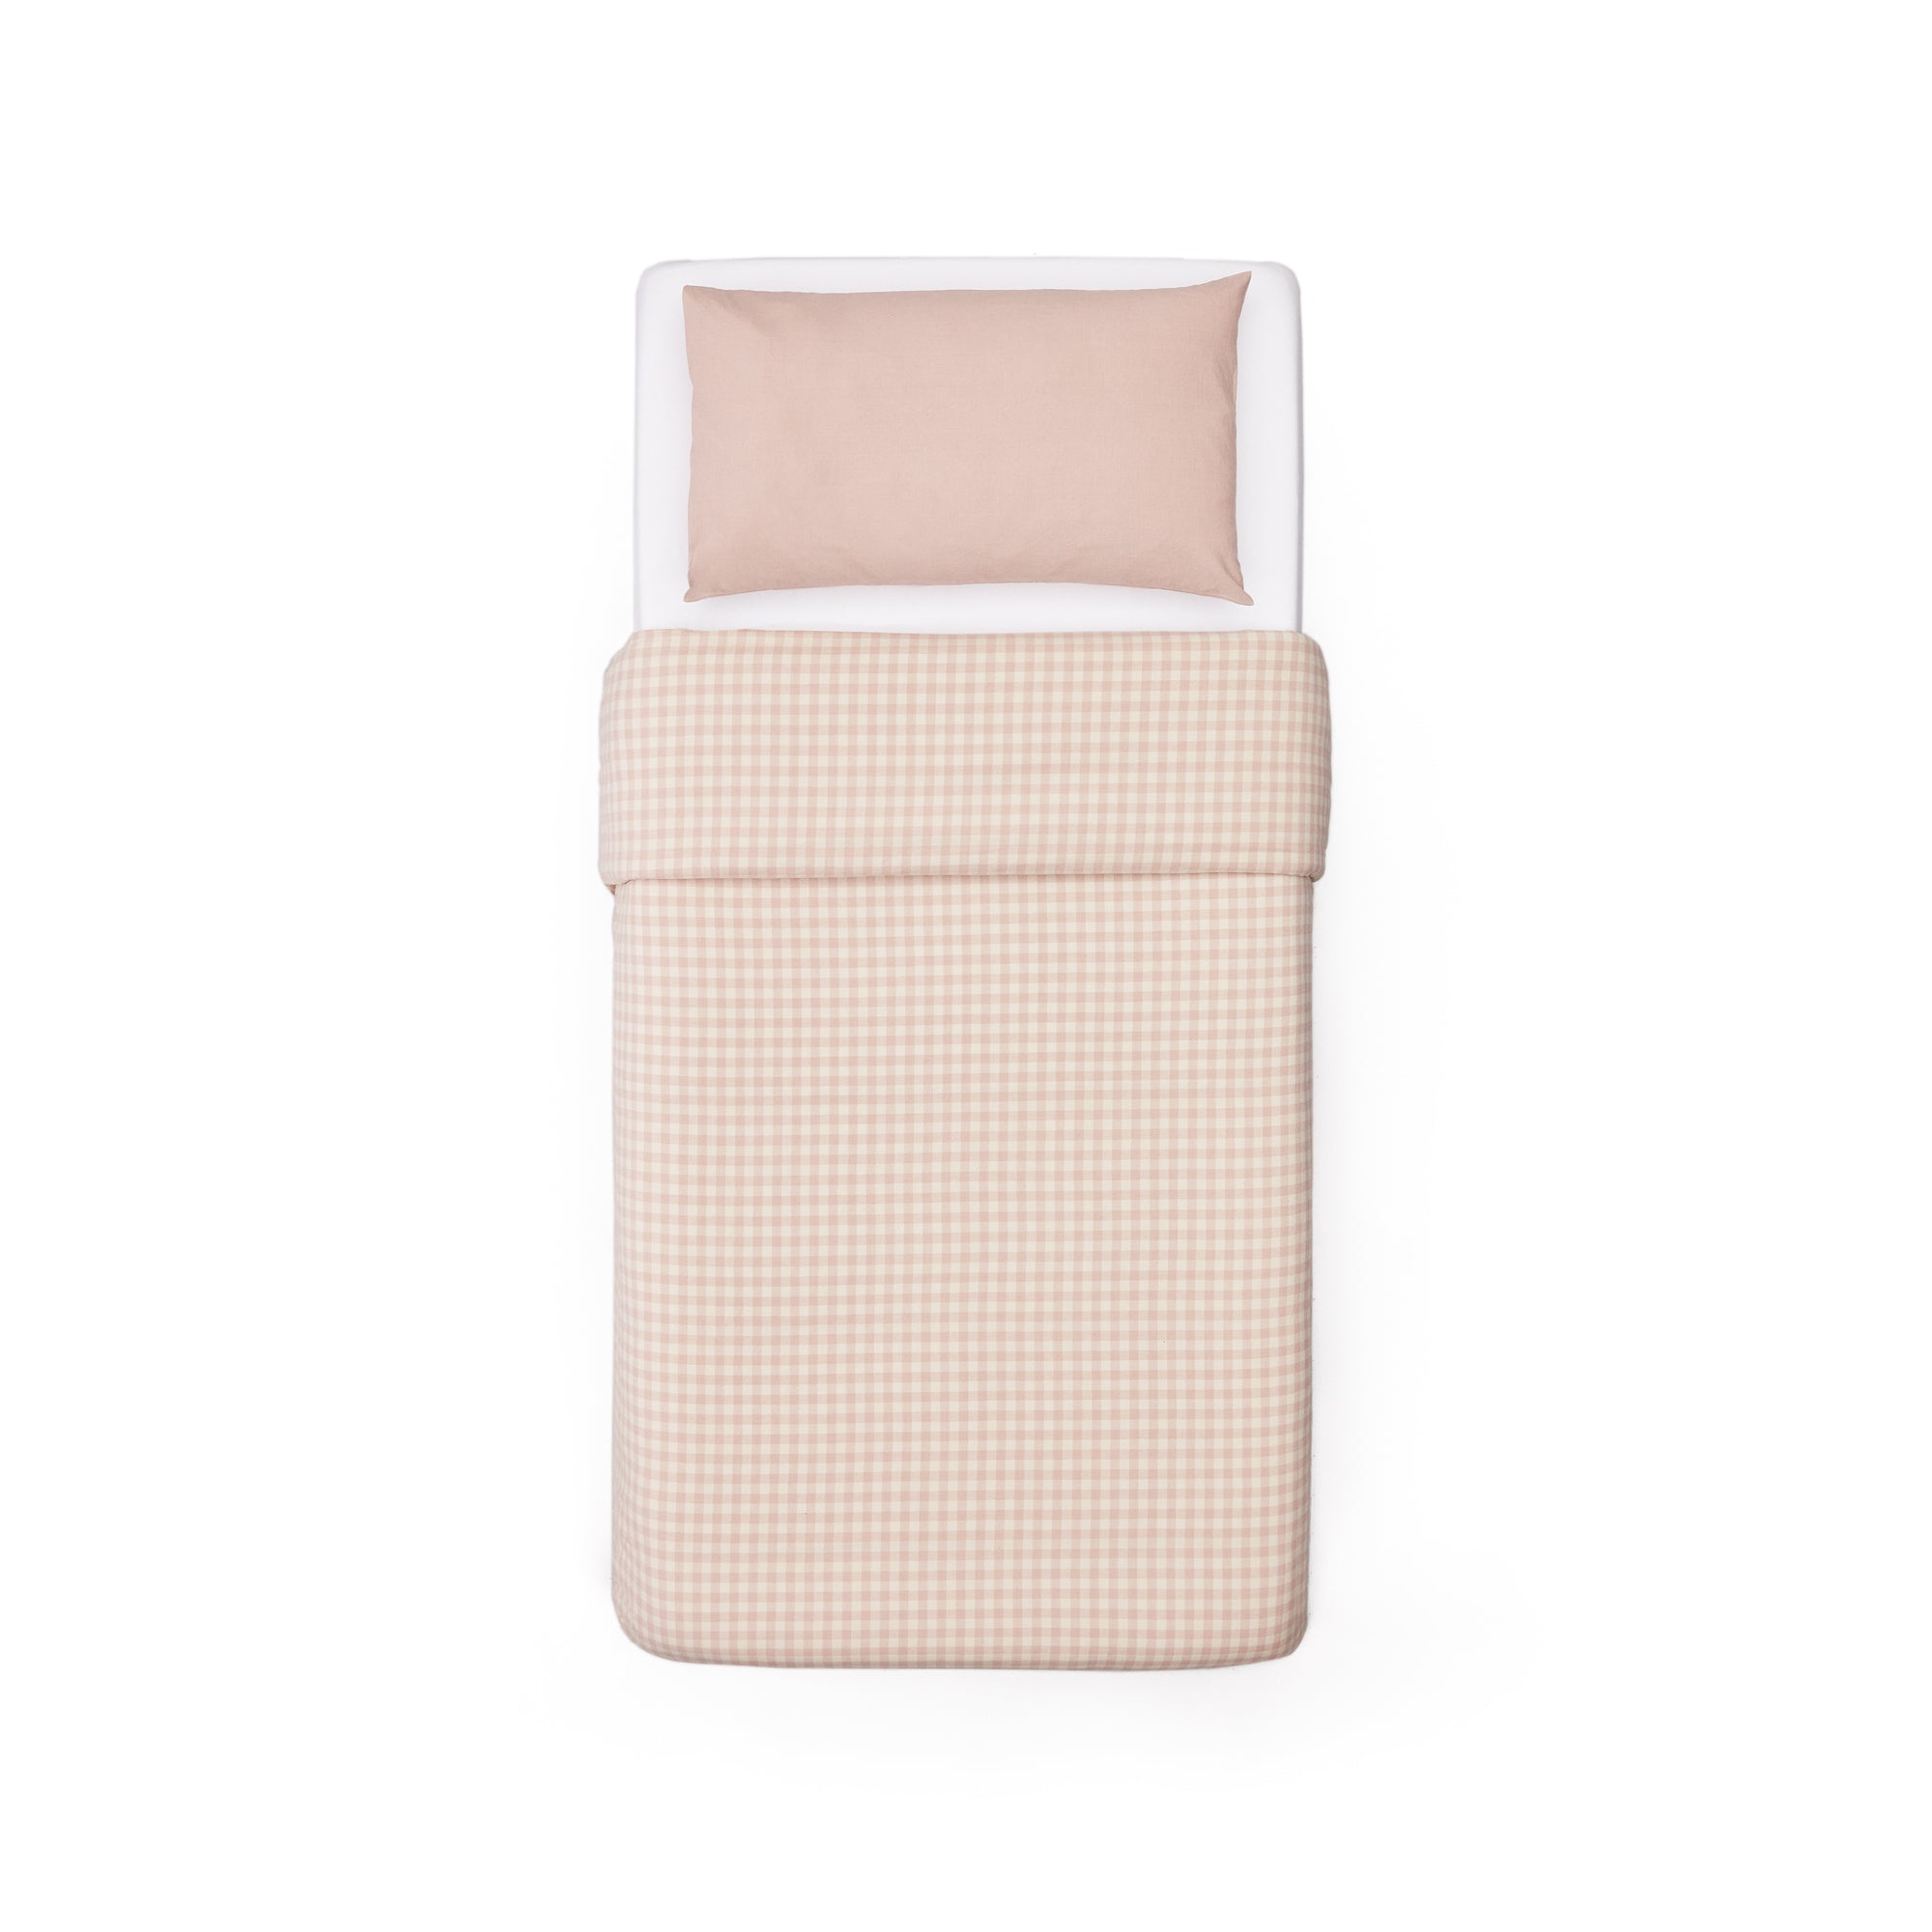 Set Yanil duvet cover, bottom and pillowcase 100% cotton pink and beige squares 90x190cm